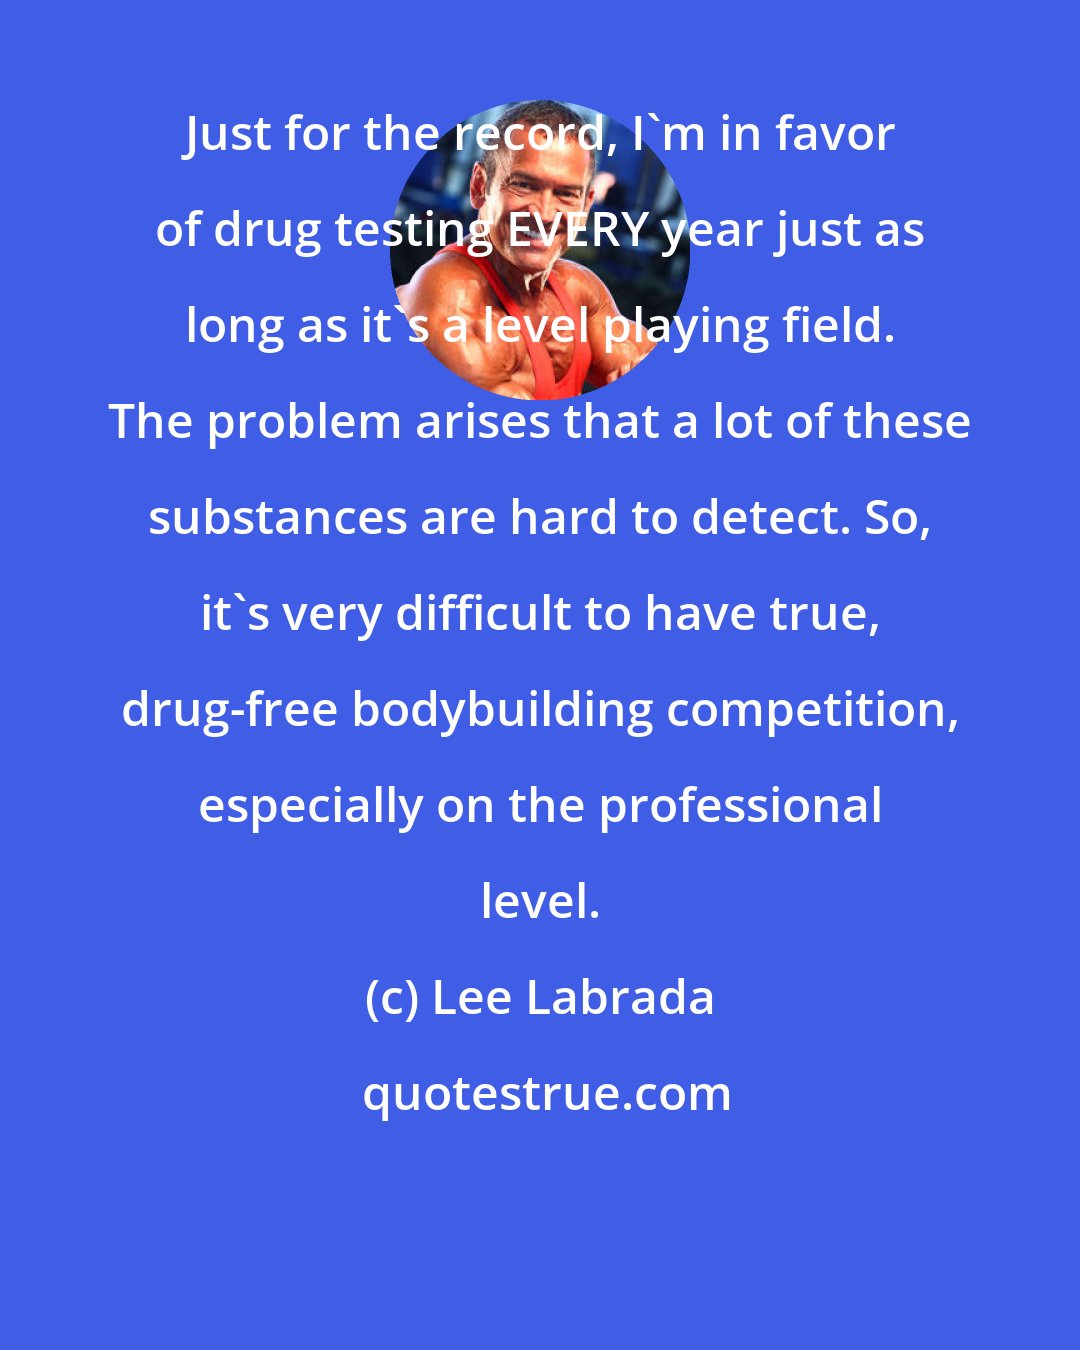 Lee Labrada: Just for the record, I'm in favor of drug testing EVERY year just as long as it's a level playing field. The problem arises that a lot of these substances are hard to detect. So, it's very difficult to have true, drug-free bodybuilding competition, especially on the professional level.